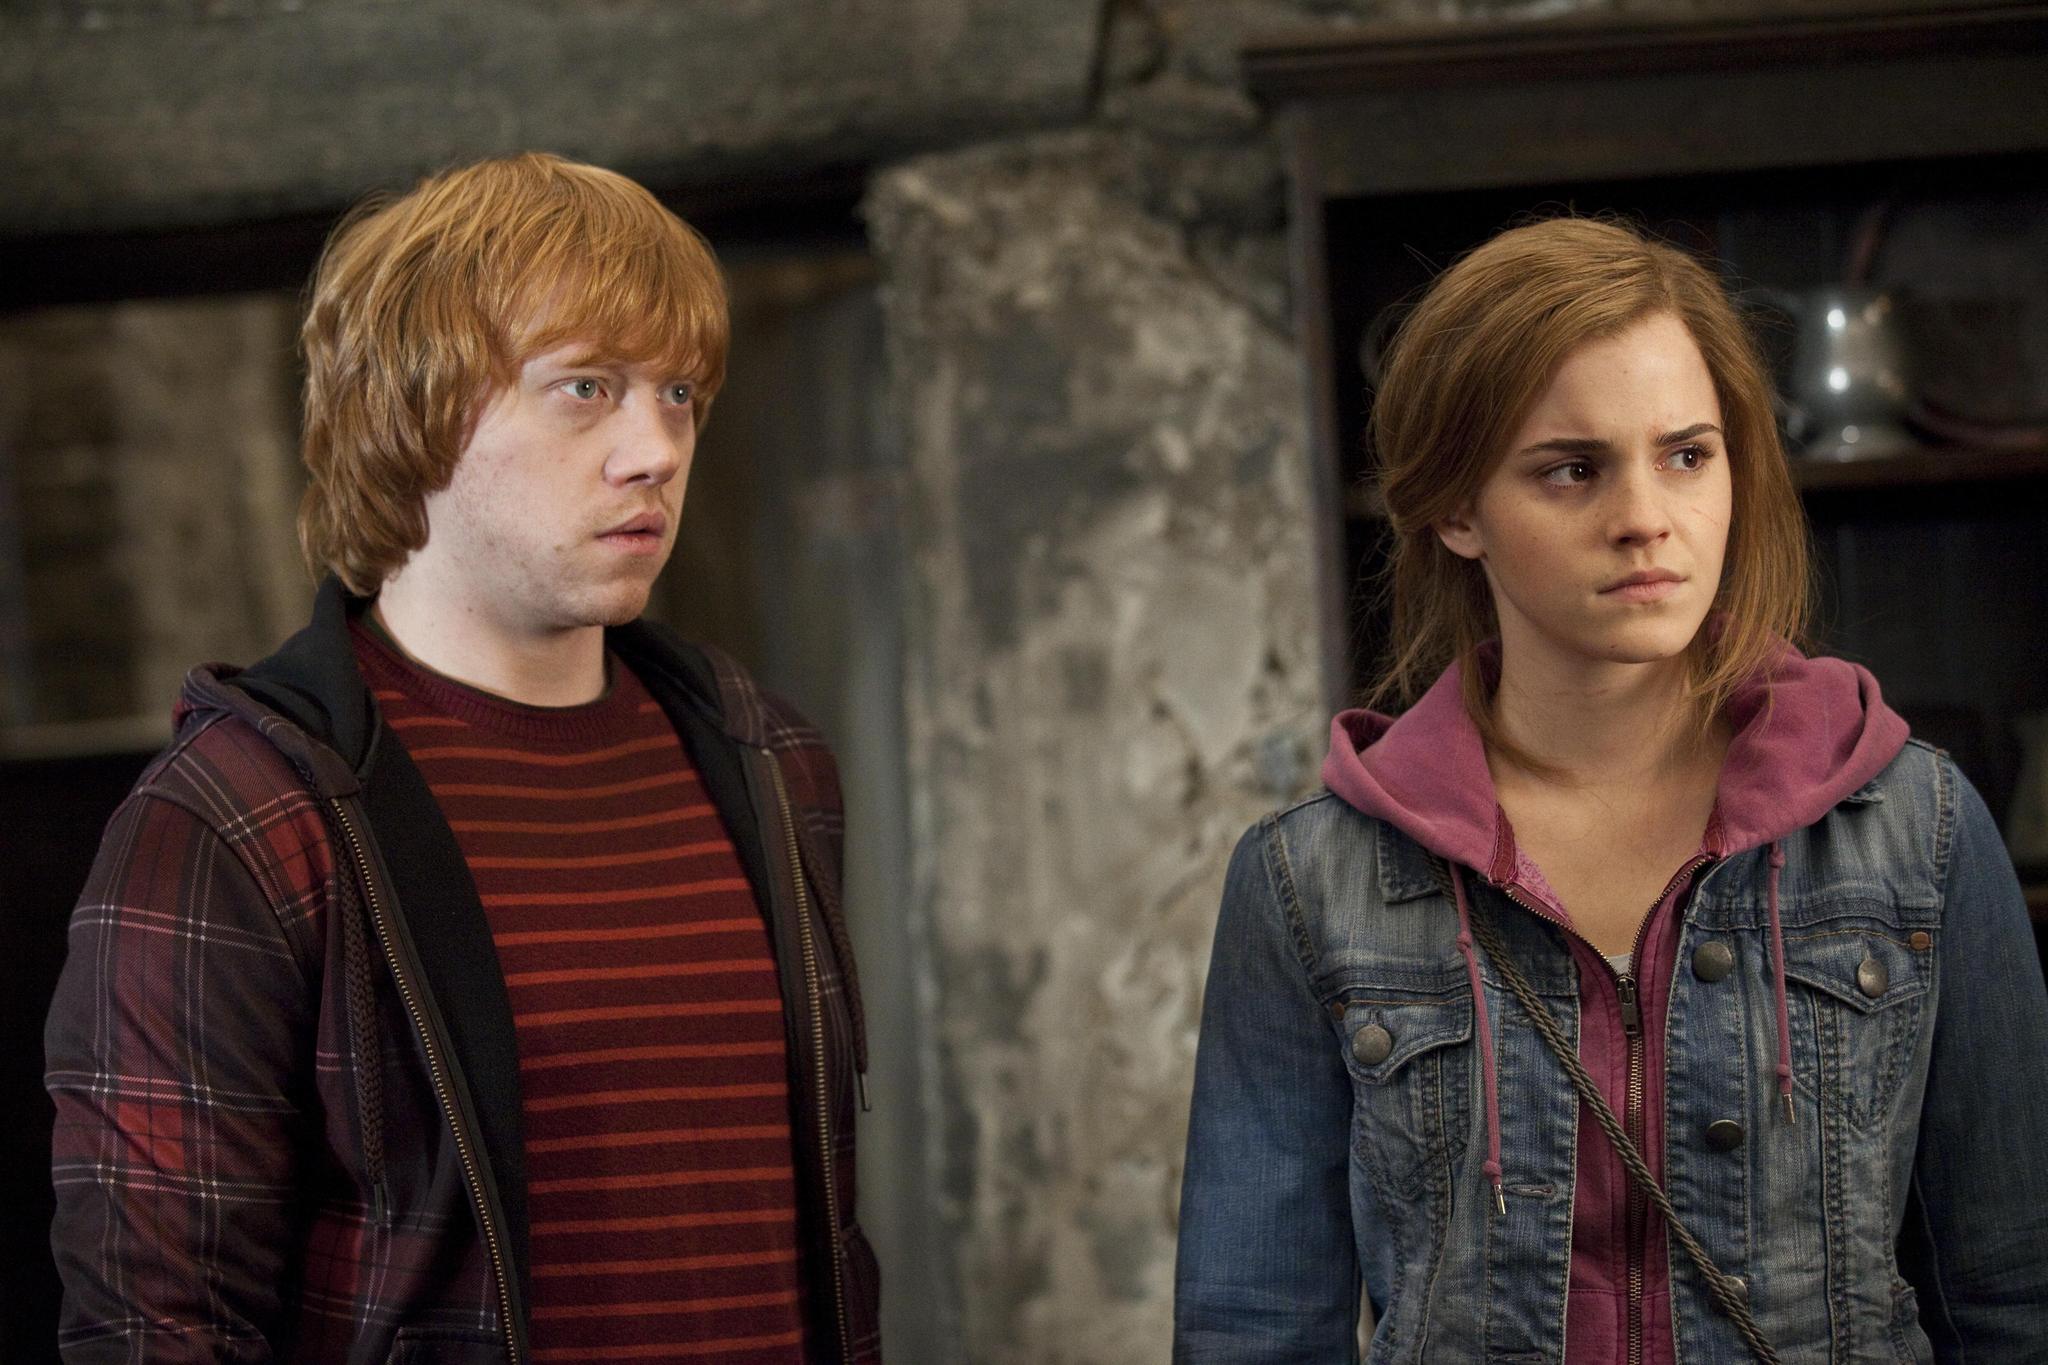 Rupert Grint played Ron Wesley for a decade of his life